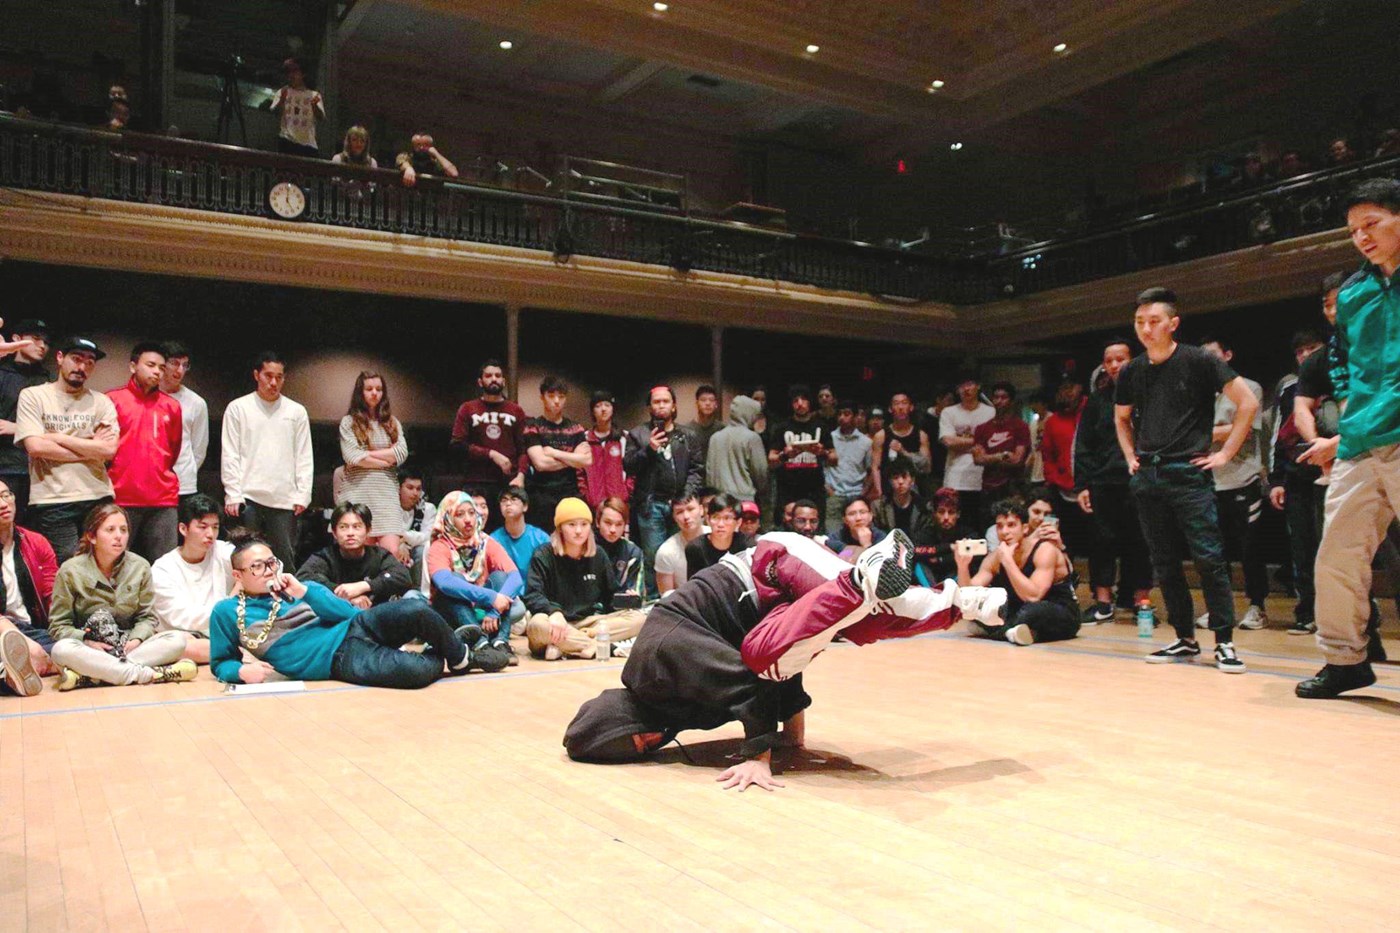 UML student breakdancing on stage with teammates